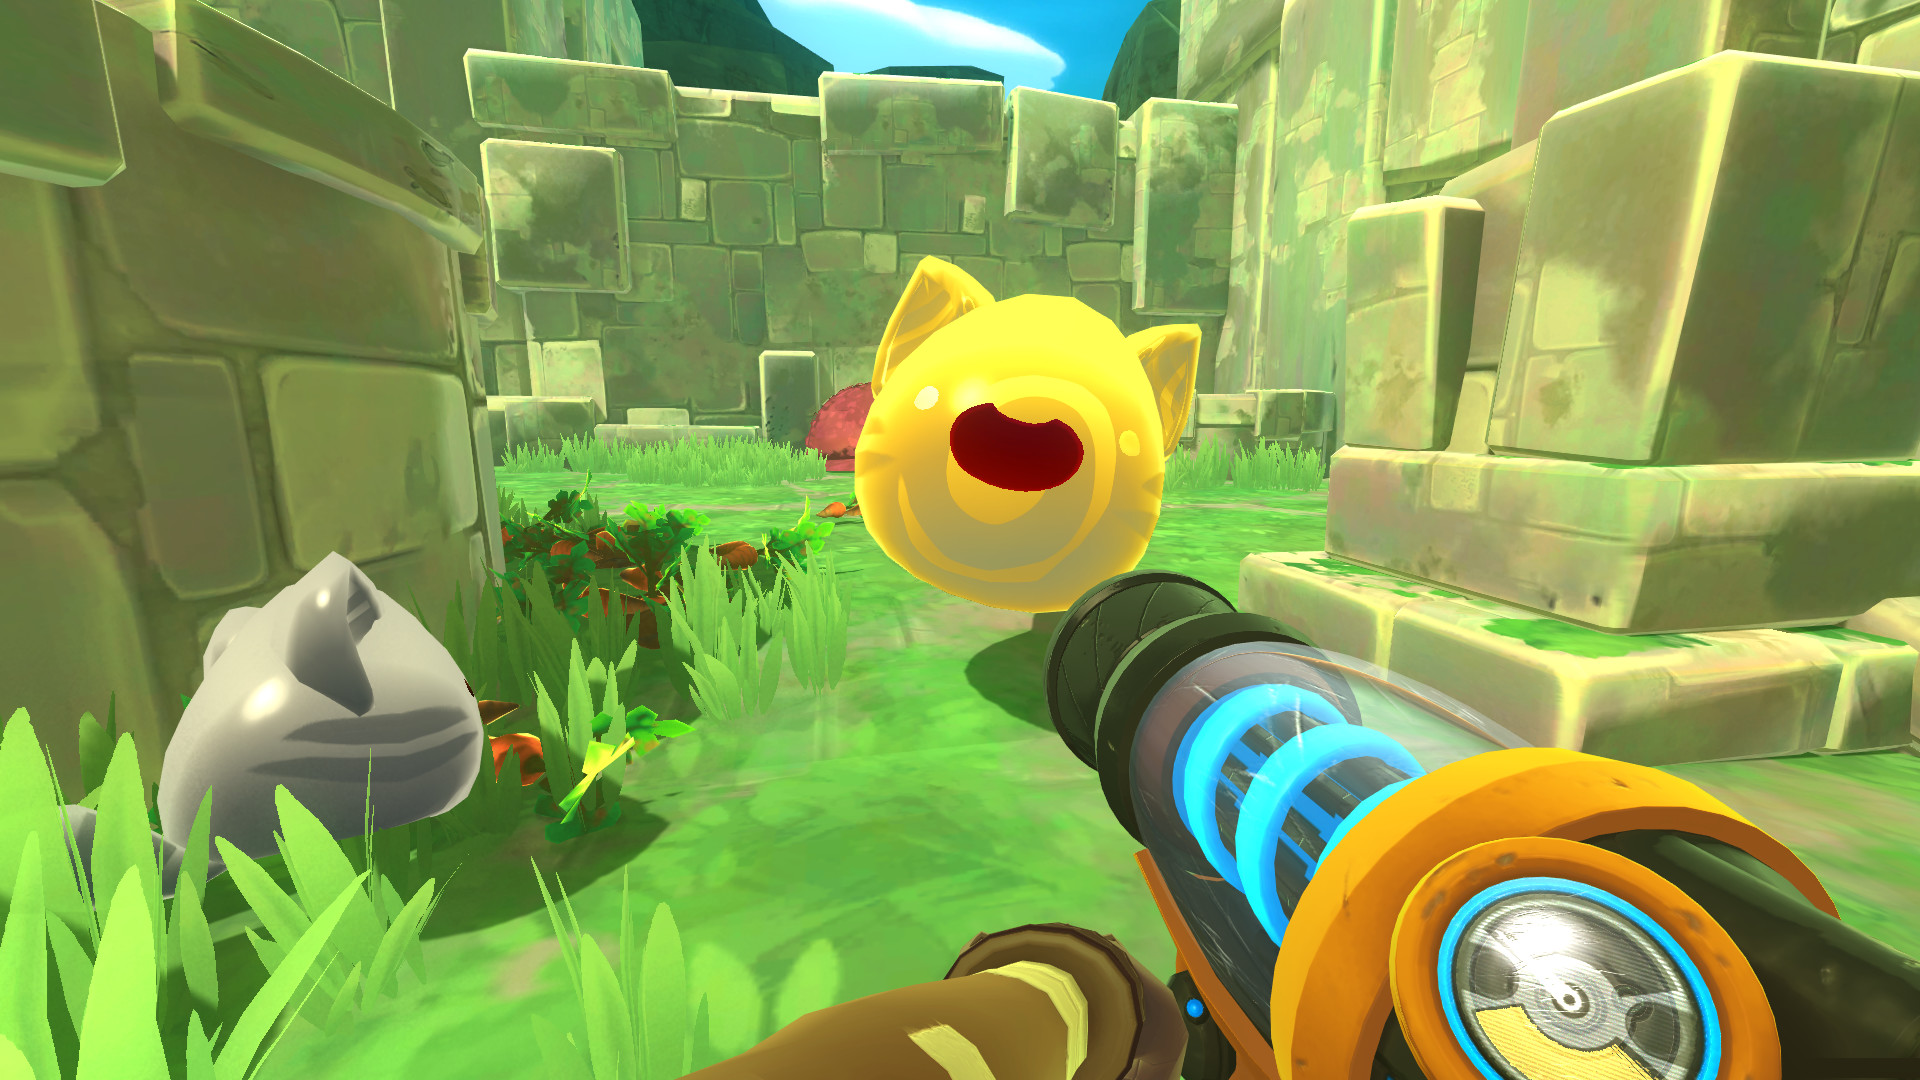 slime rancher with mods download for free